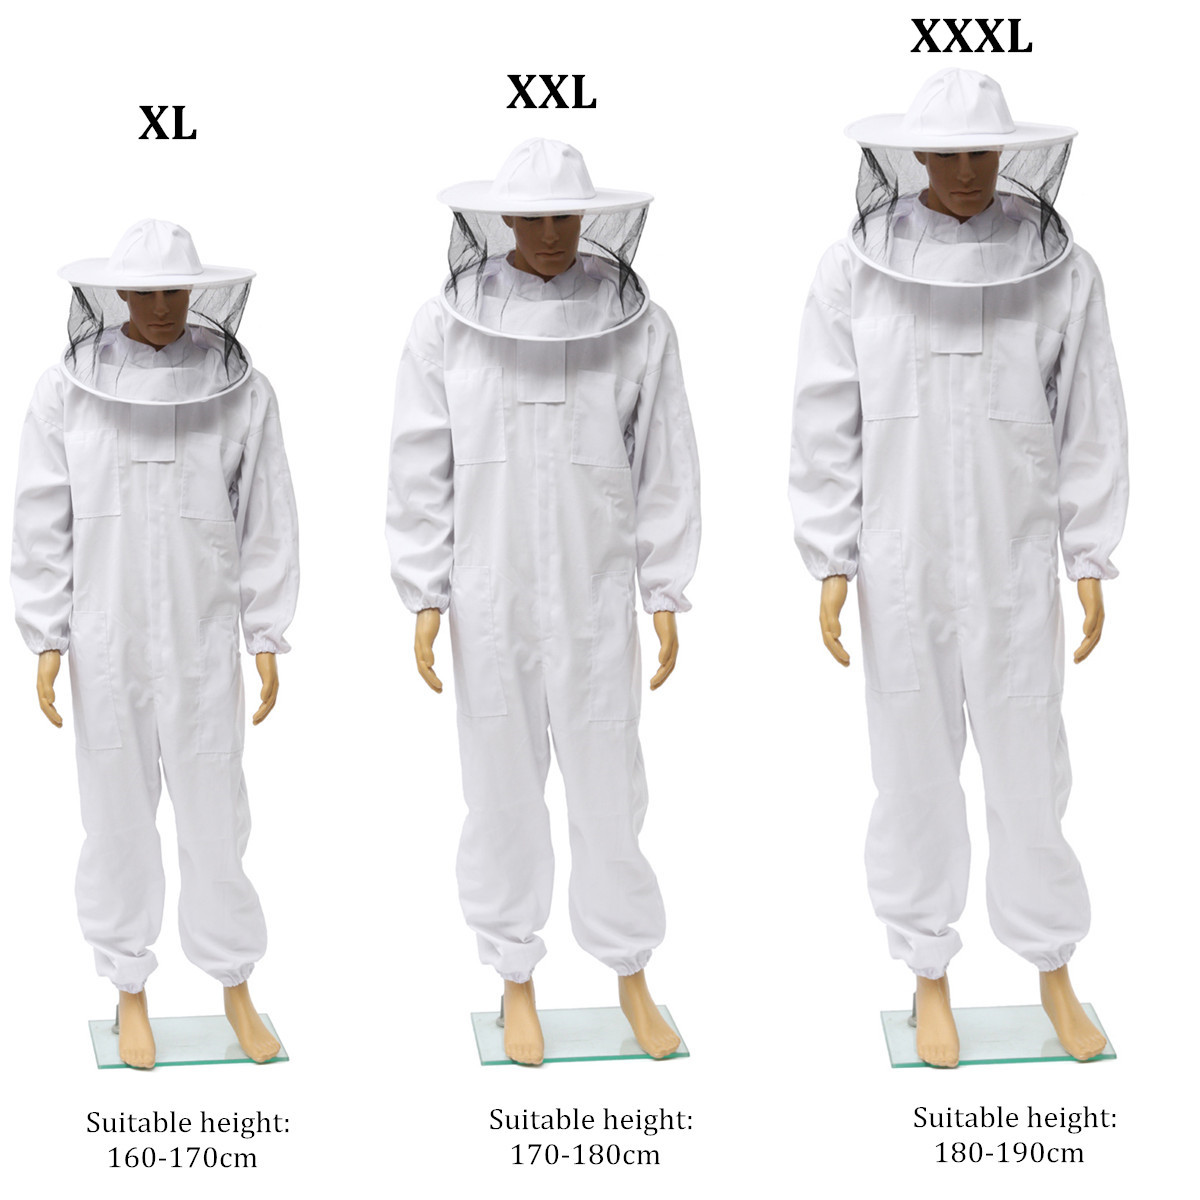 Beekeepers-Bee-Keeping-Cotton-Full-Protector-Suit-With-Veil-Hat-Hood-Bee-Suit-XL-XXL-XXL-1277290-1